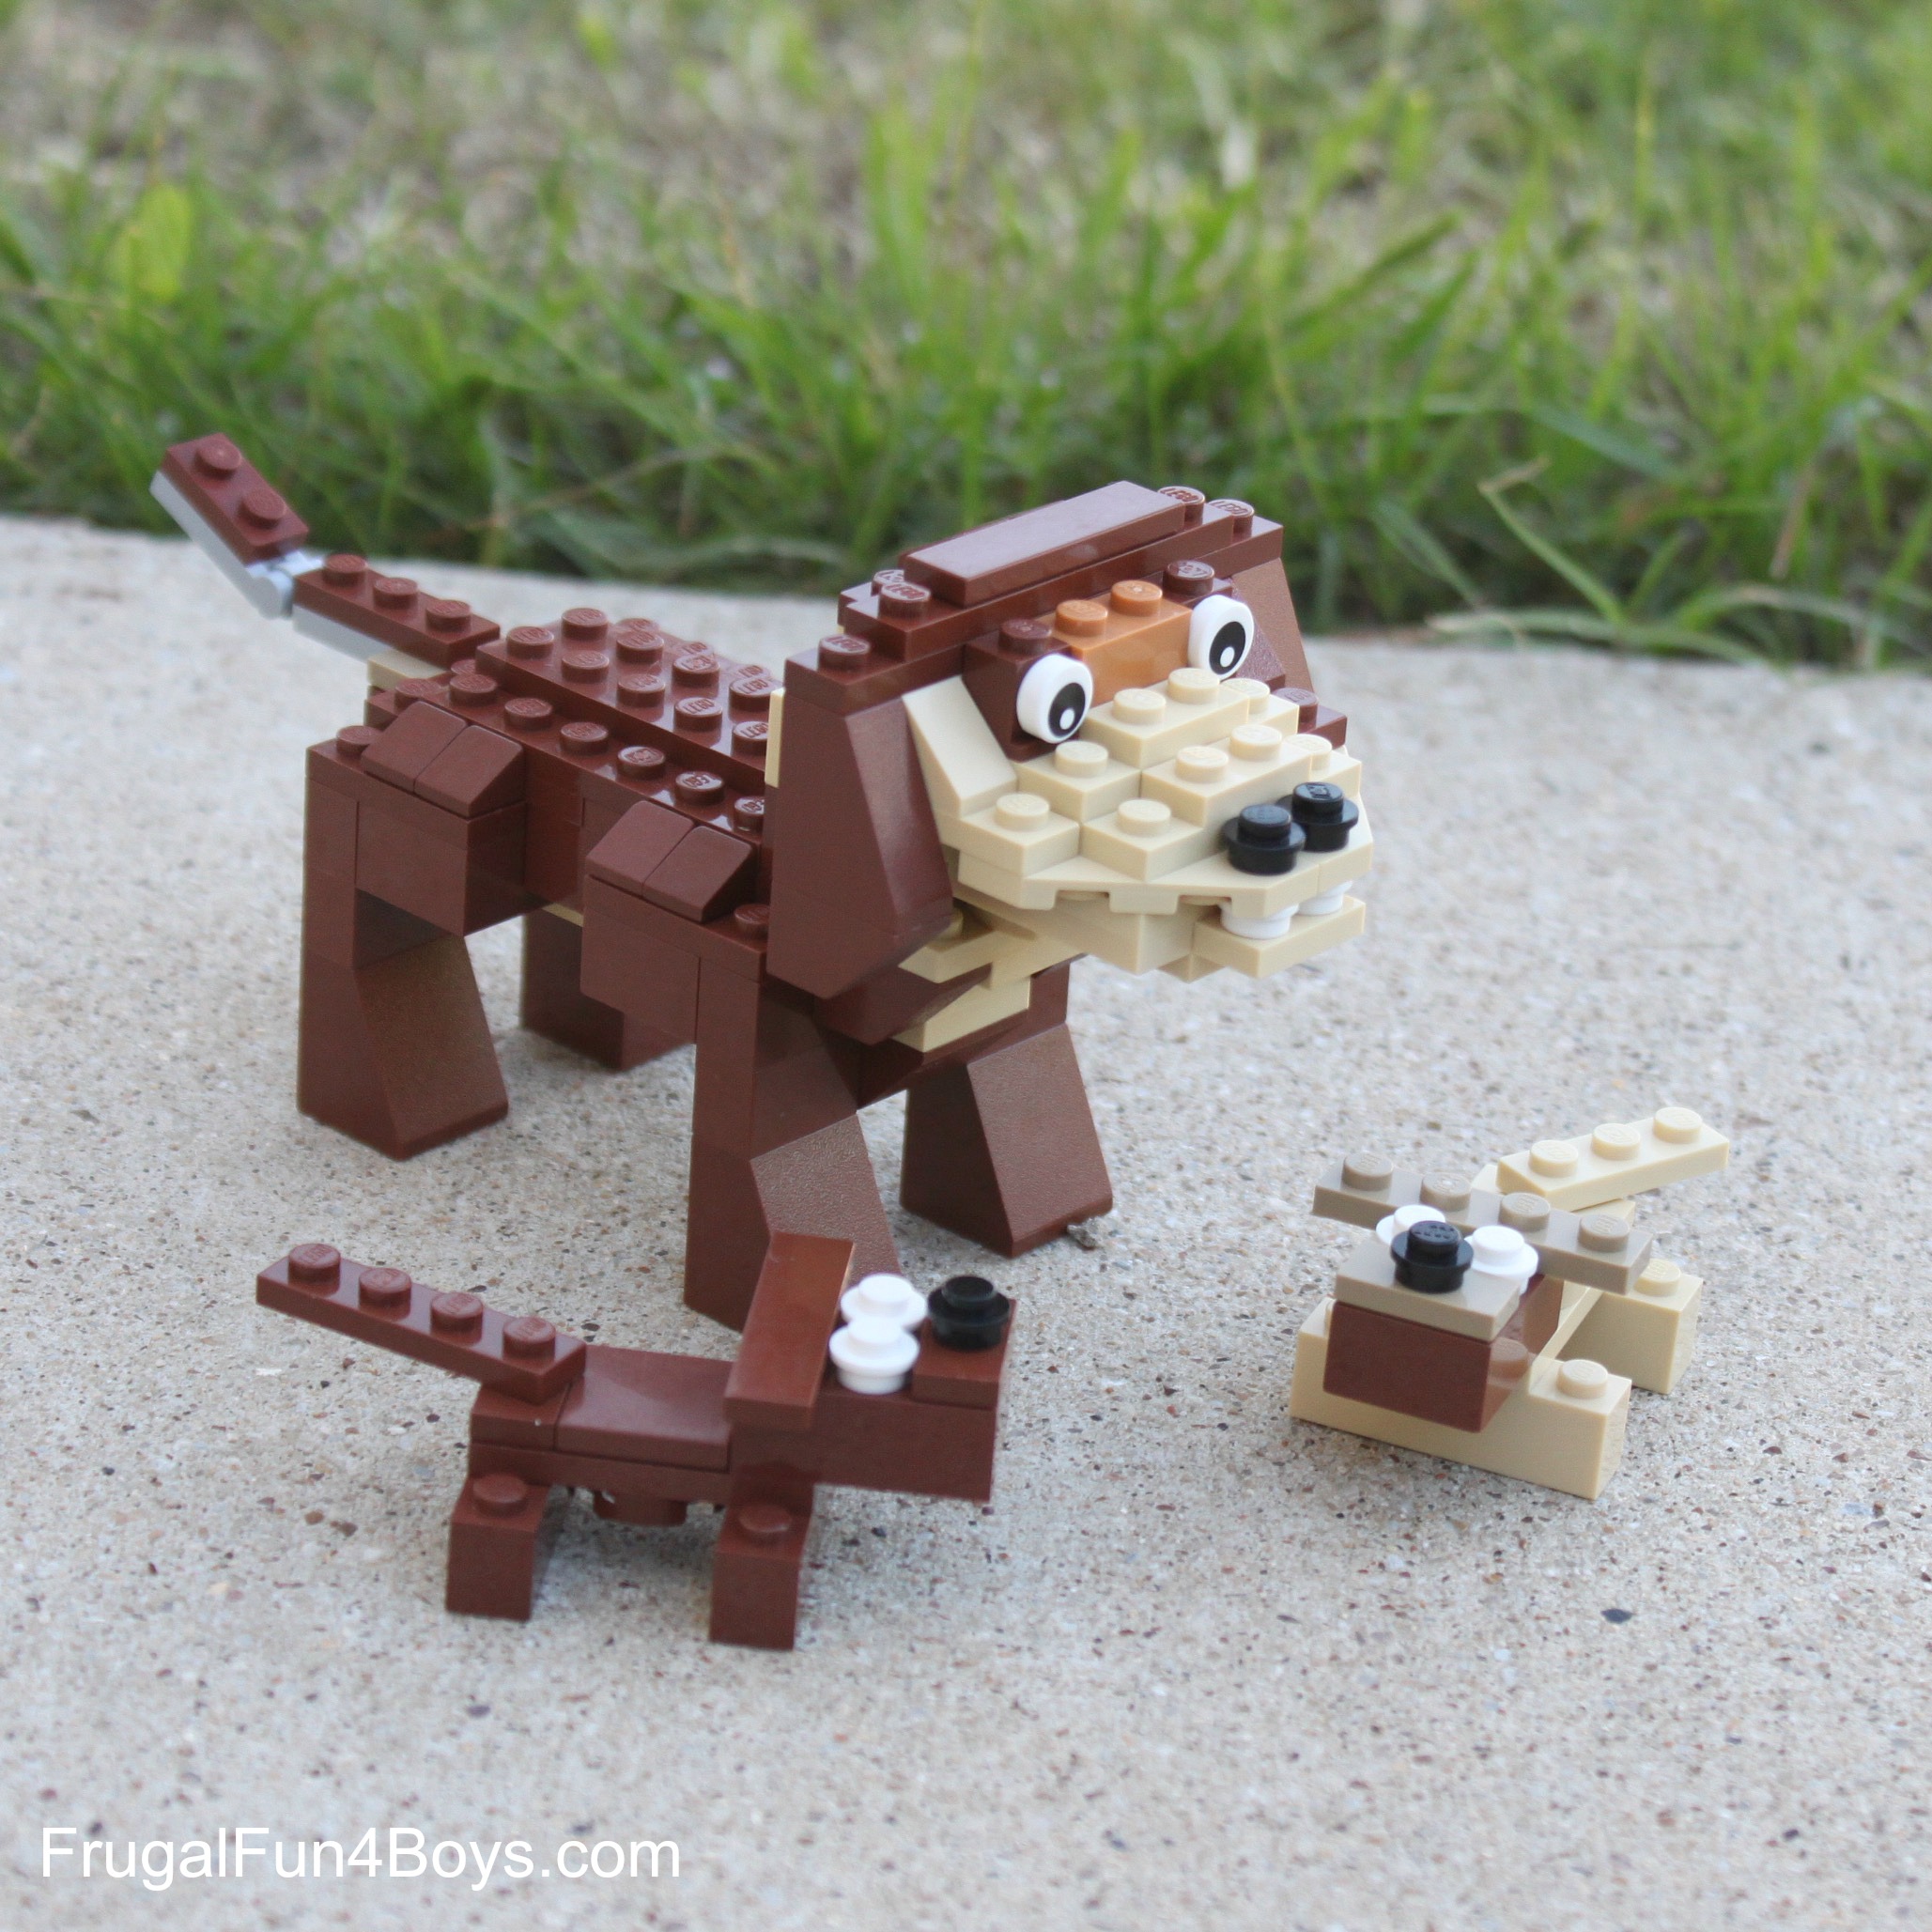 How to Build LEGO Dogs